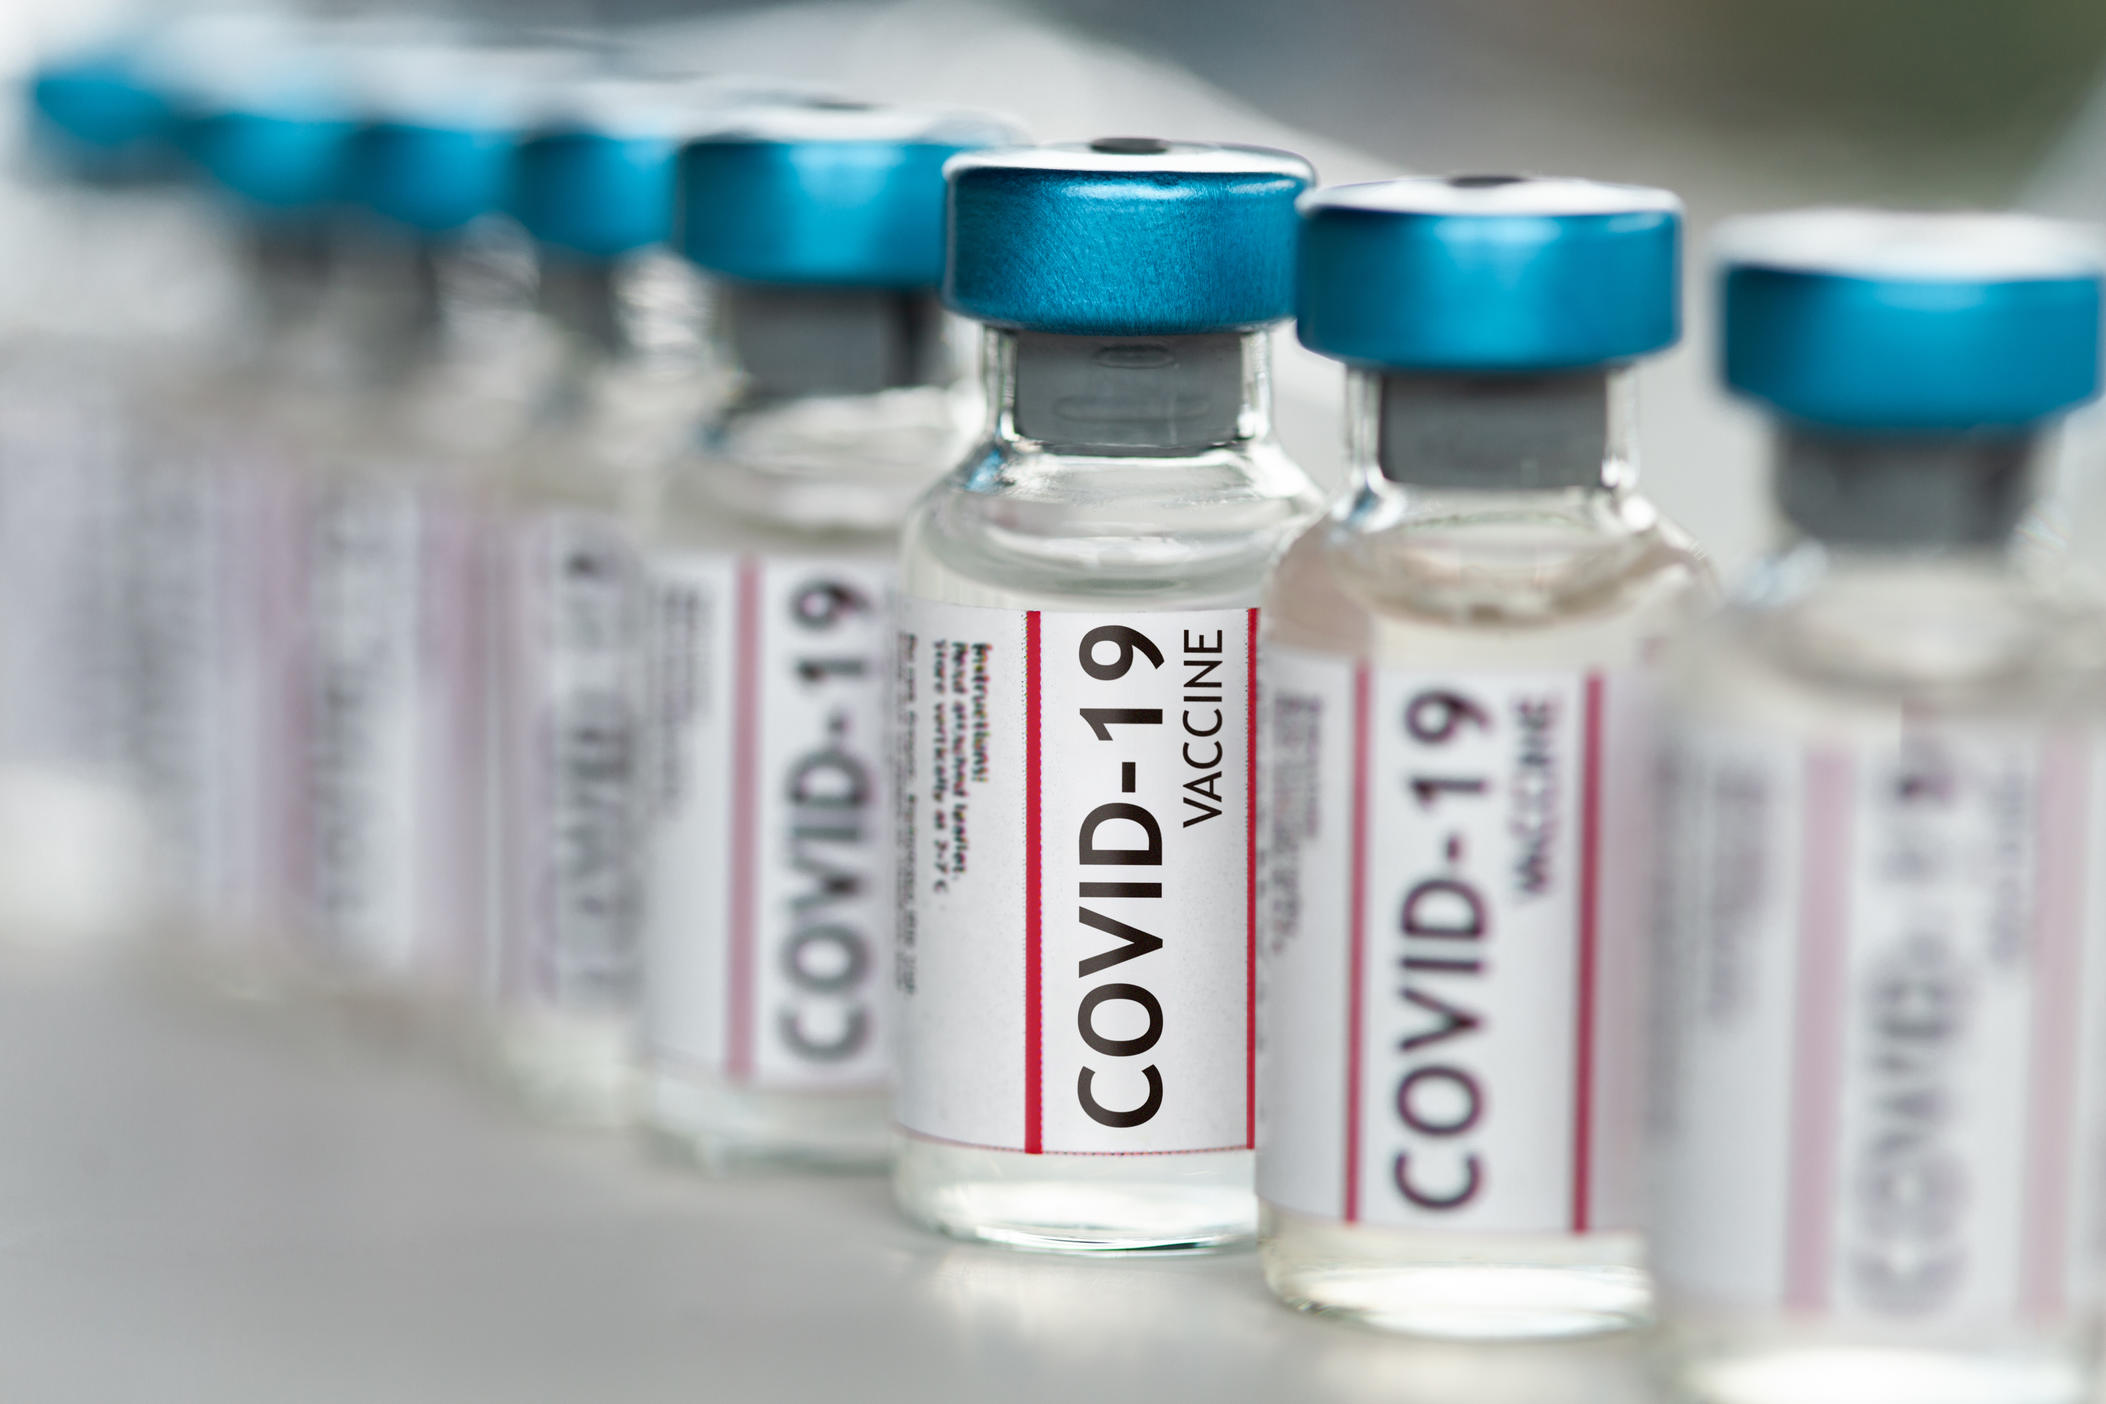 thesis statement about covid vaccines